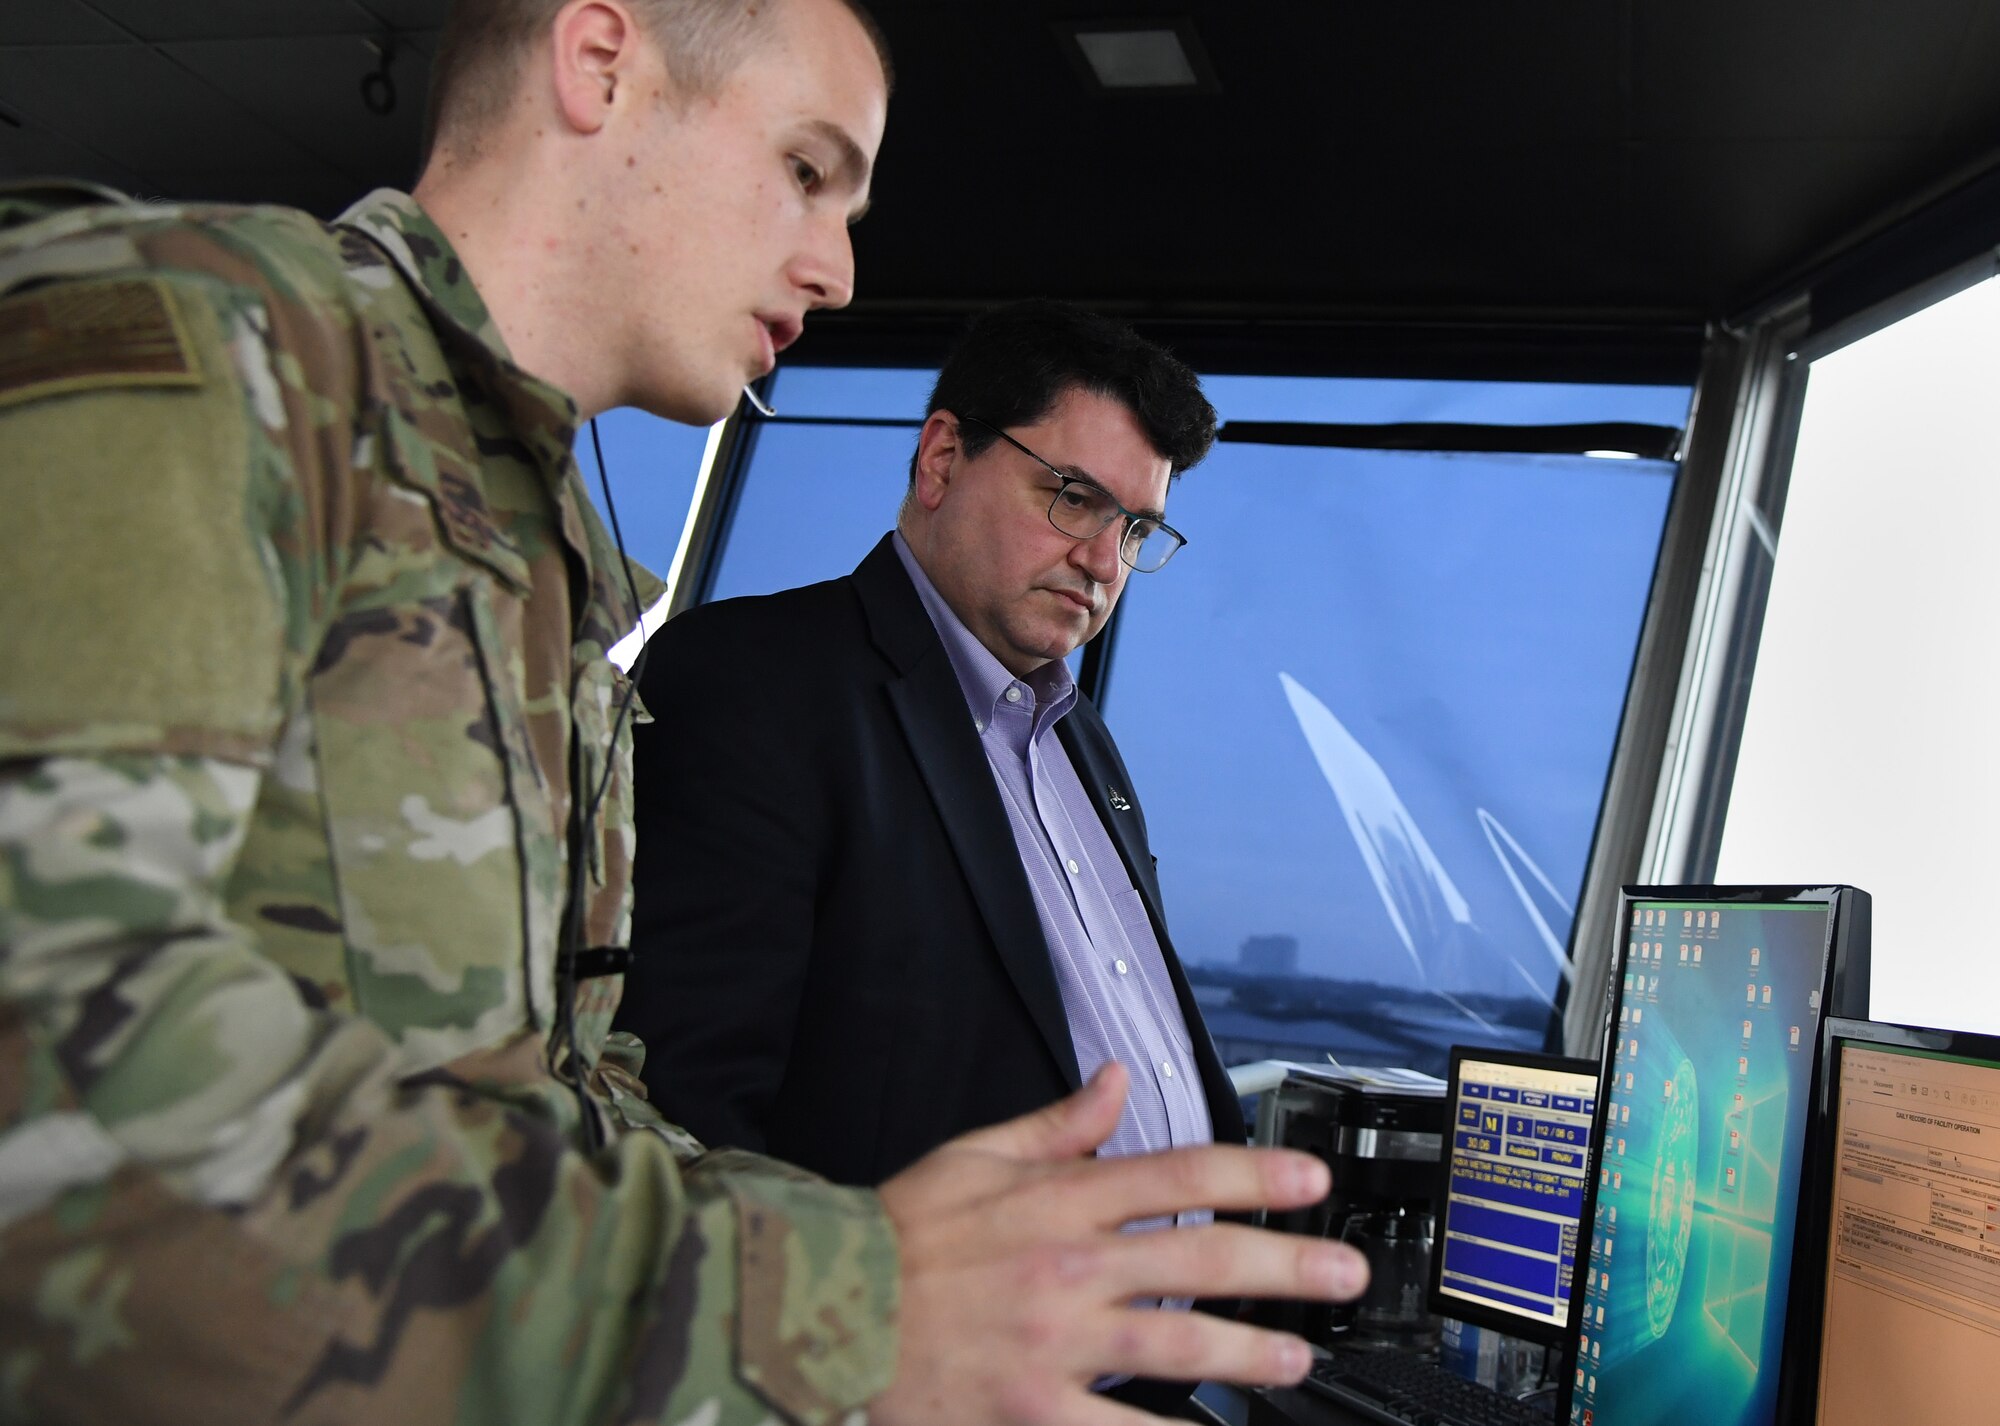 U.S. Air Force Staff Sgt. Andrew Abreo, 81st Operations Support Flight air traffic controller, reviews air traffic control tower support details to Peter Abide, Biloxi, Mississippi, city attorney, asks questions during during the airspace sustainability tour inside Cody Hall at Keesler Air Force Base, Mississippi, Jan. 23, 2019. Keesler hosted the community engagement for civic leaders to discuss Keesler's flying mission requirements in order to create processes which informs key decision makers regarding local development and to ensure compatible economic growth for the surrounding communities. (U.S. Air Force photo by Kemberly Groue)